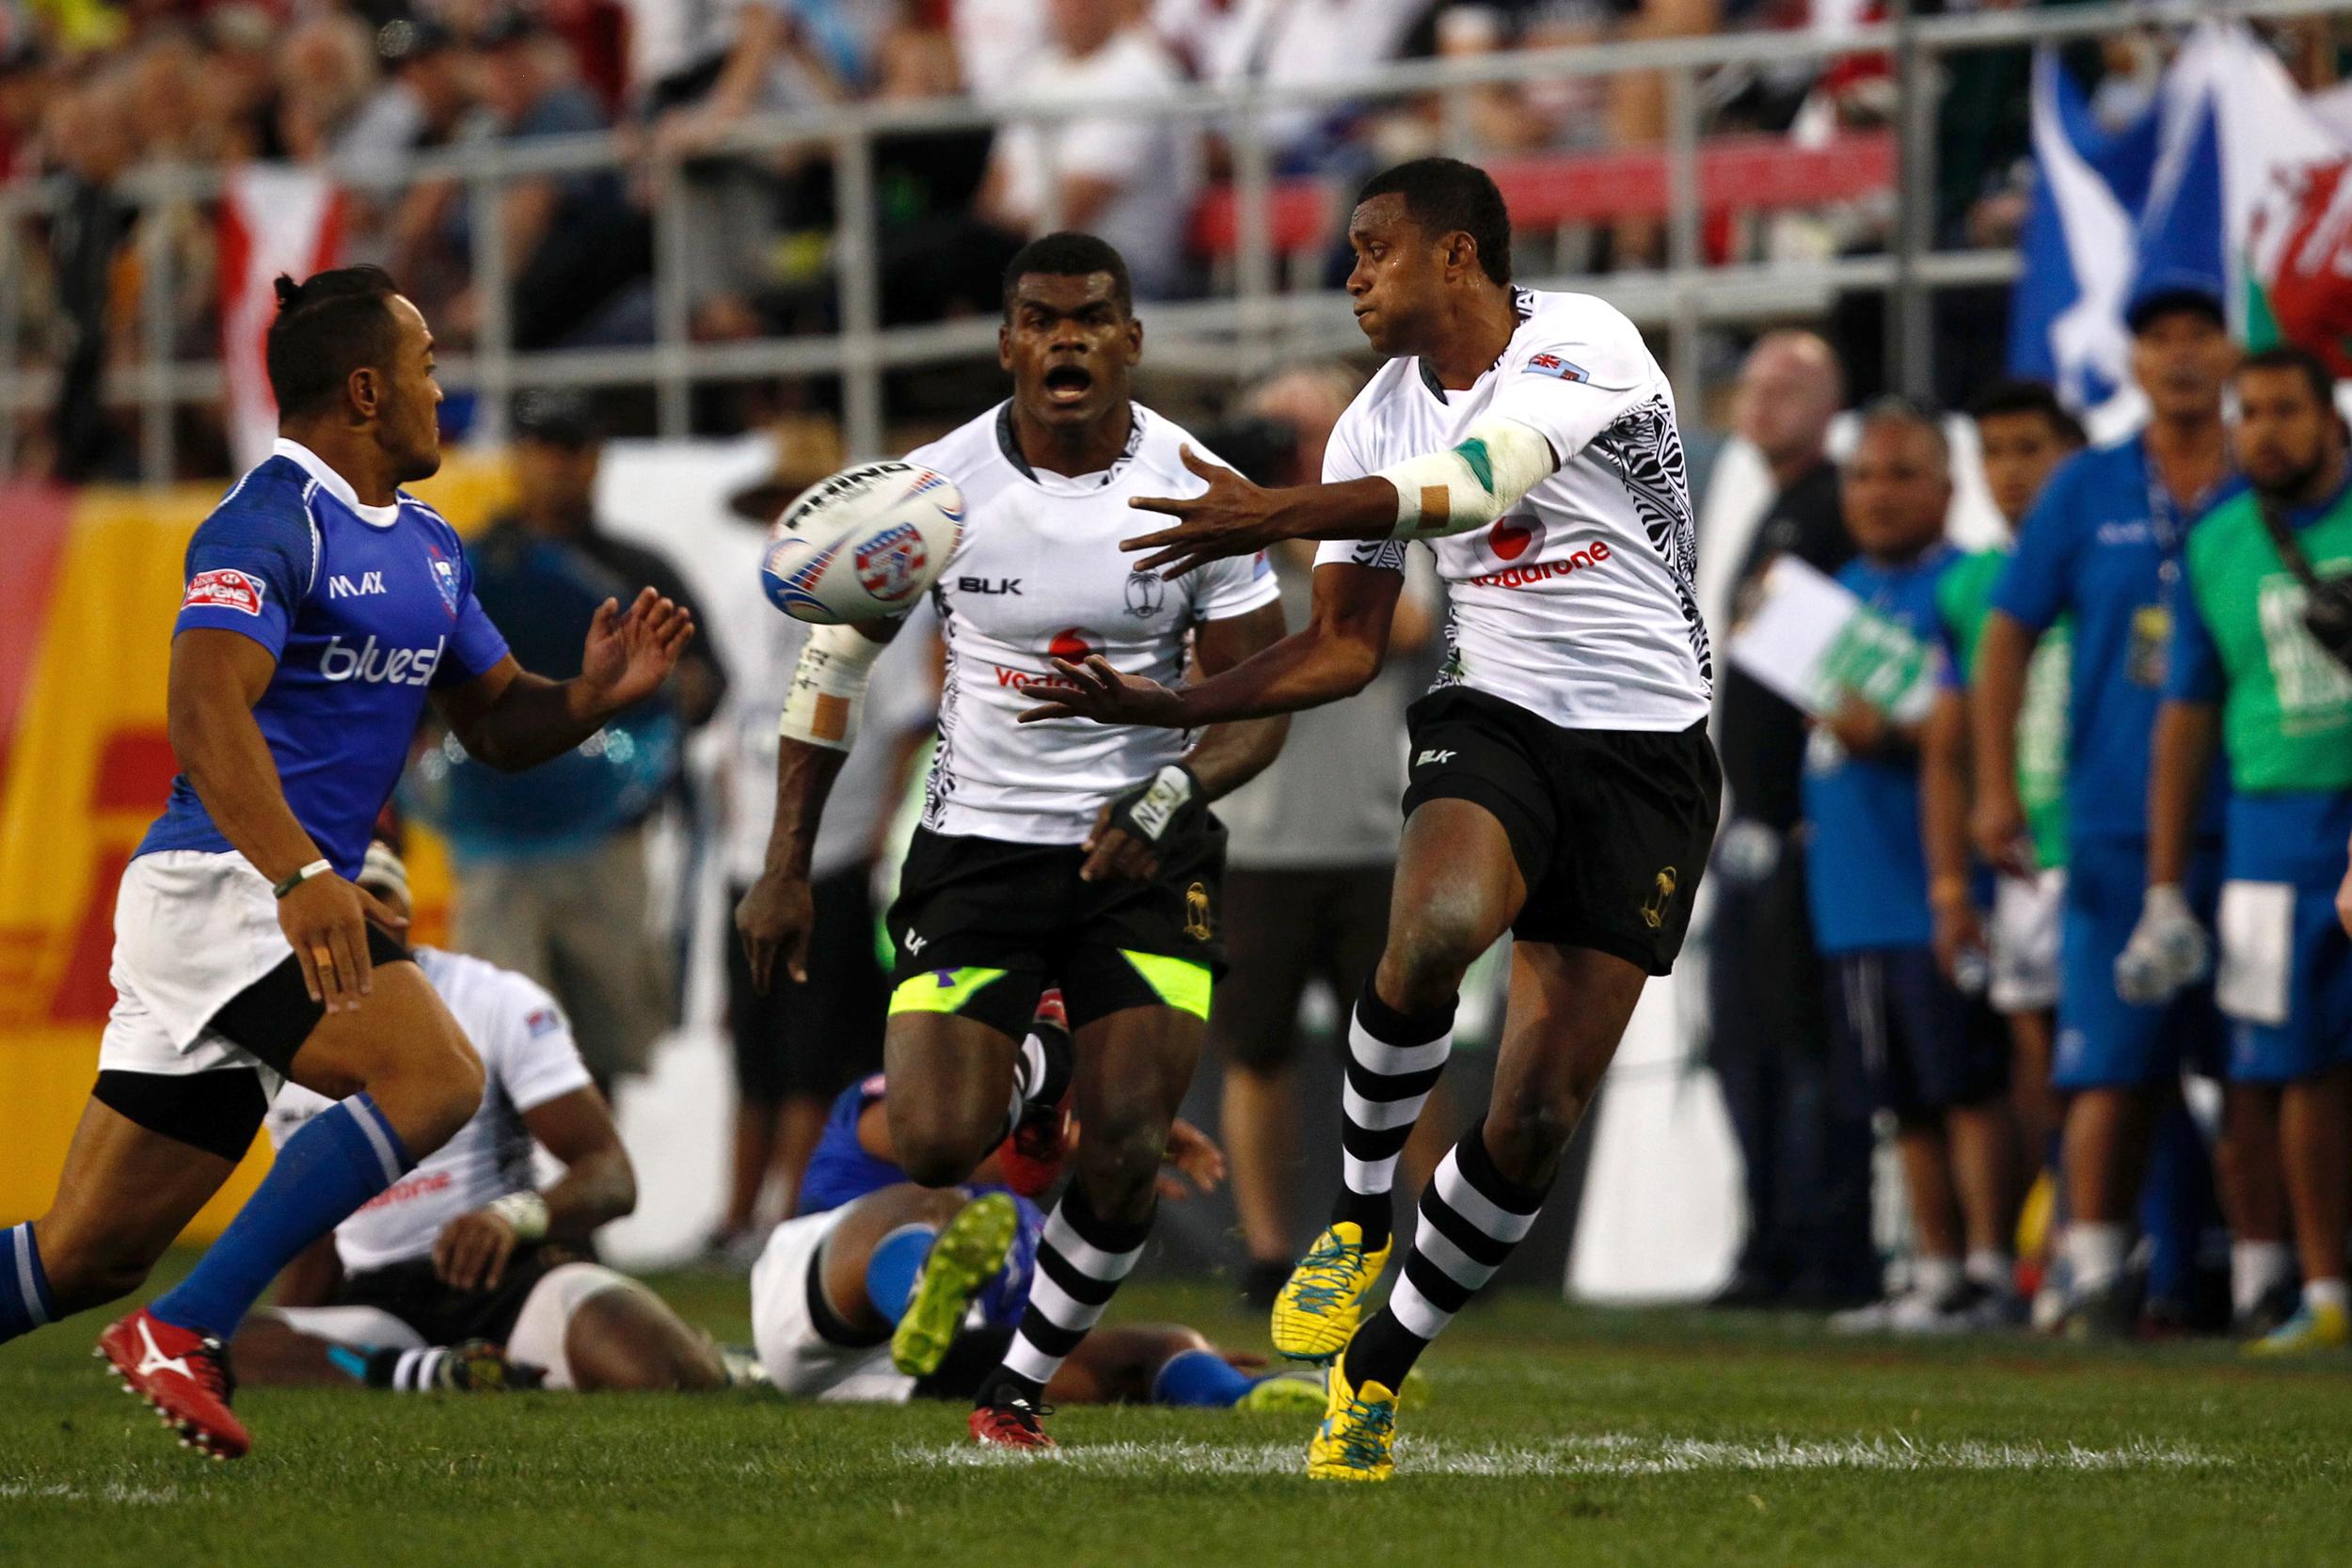 Fiji will face New Zealand for the right to top Pool A ©World Rugby